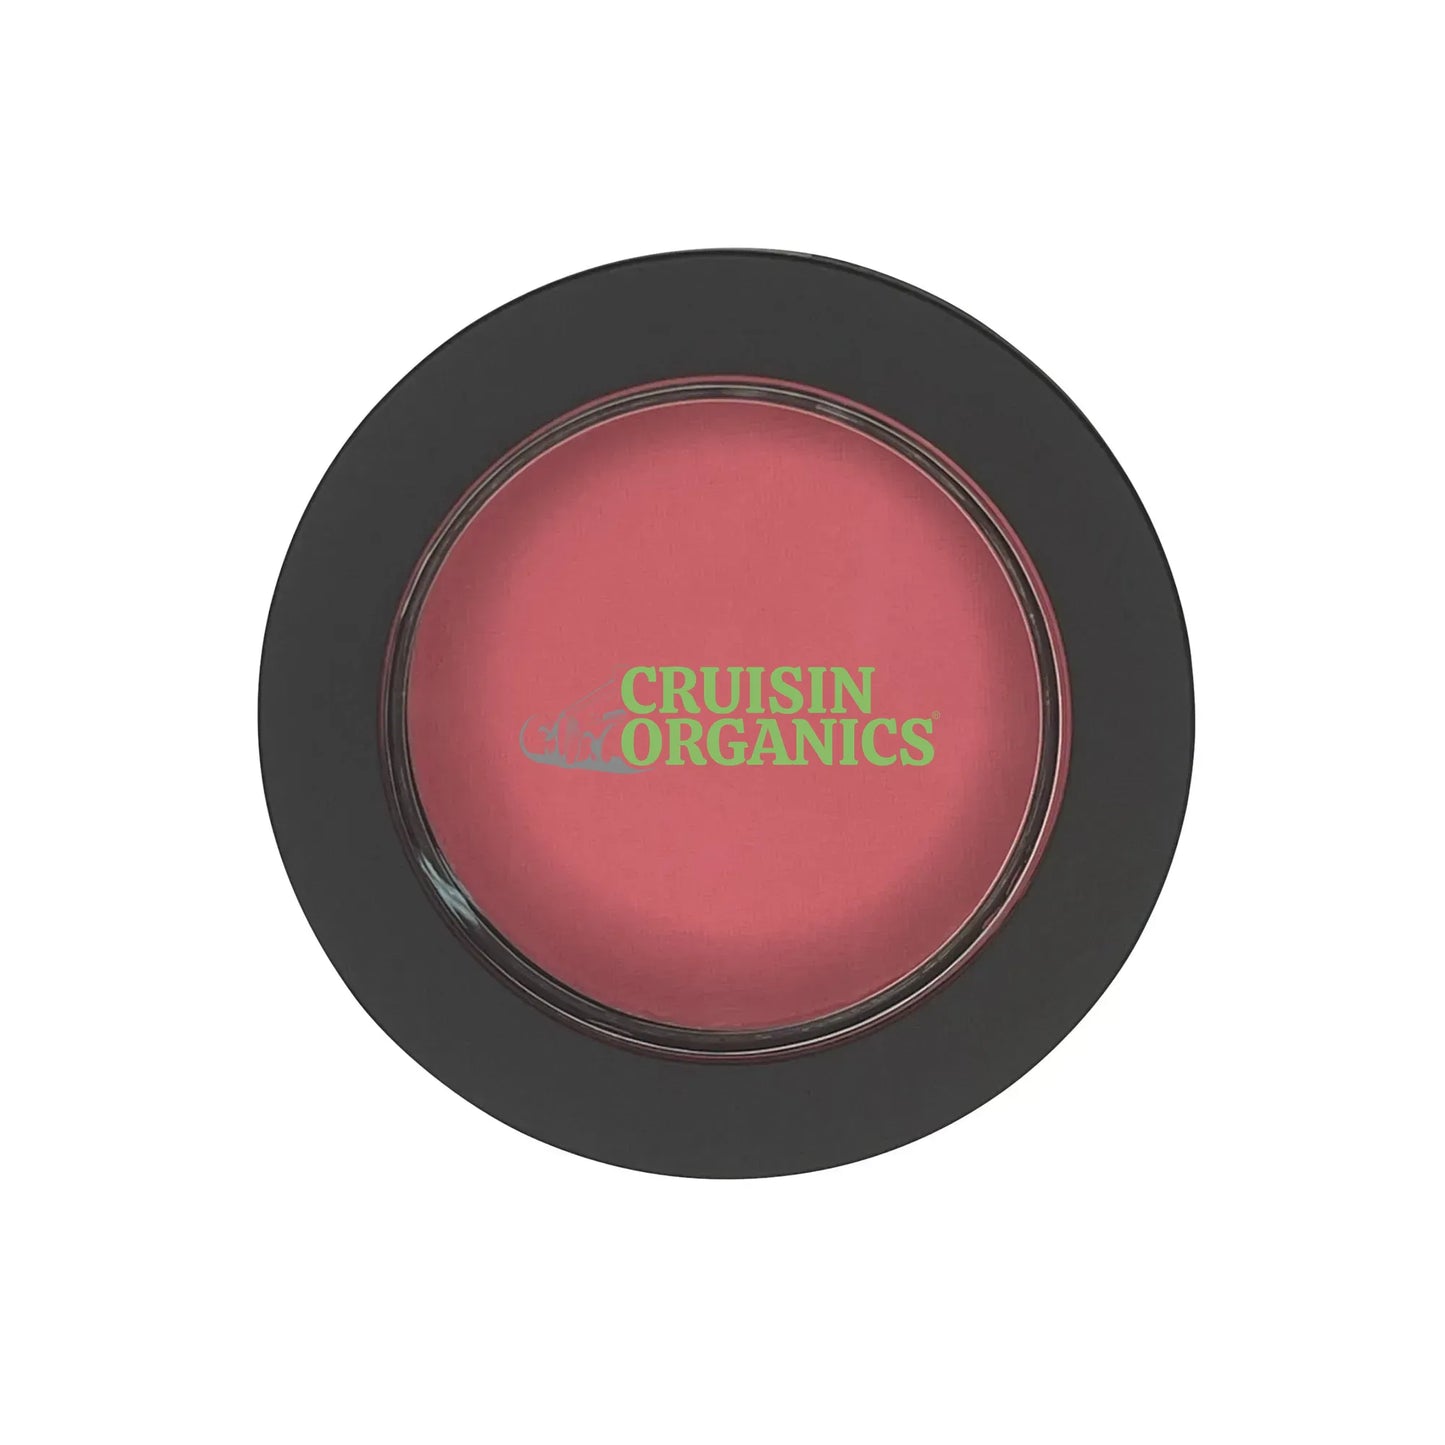 "Crusin Organics Lotus blush - talc-free, blend well with skin. Mix shades in one pan for any occasion. Triple-milled powder reflects clean beauty. Your skin will love it."